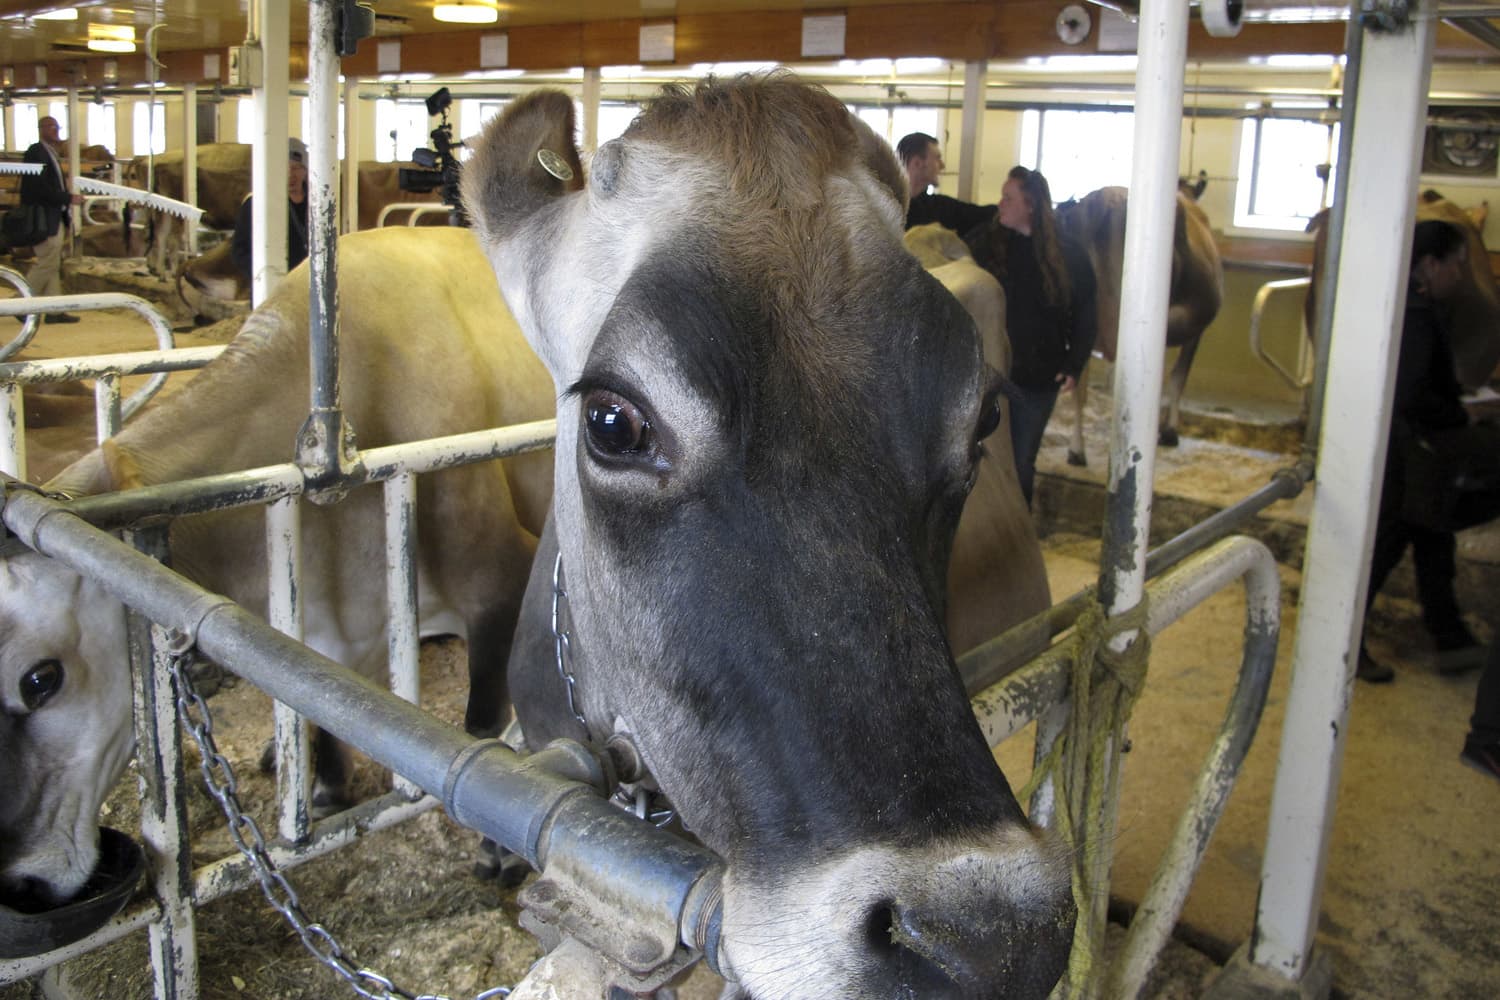 A milk cow stands in her stall at the Billings Farm &amp; Museum in Woodstock, VT. (Lisa Rathke/AP)